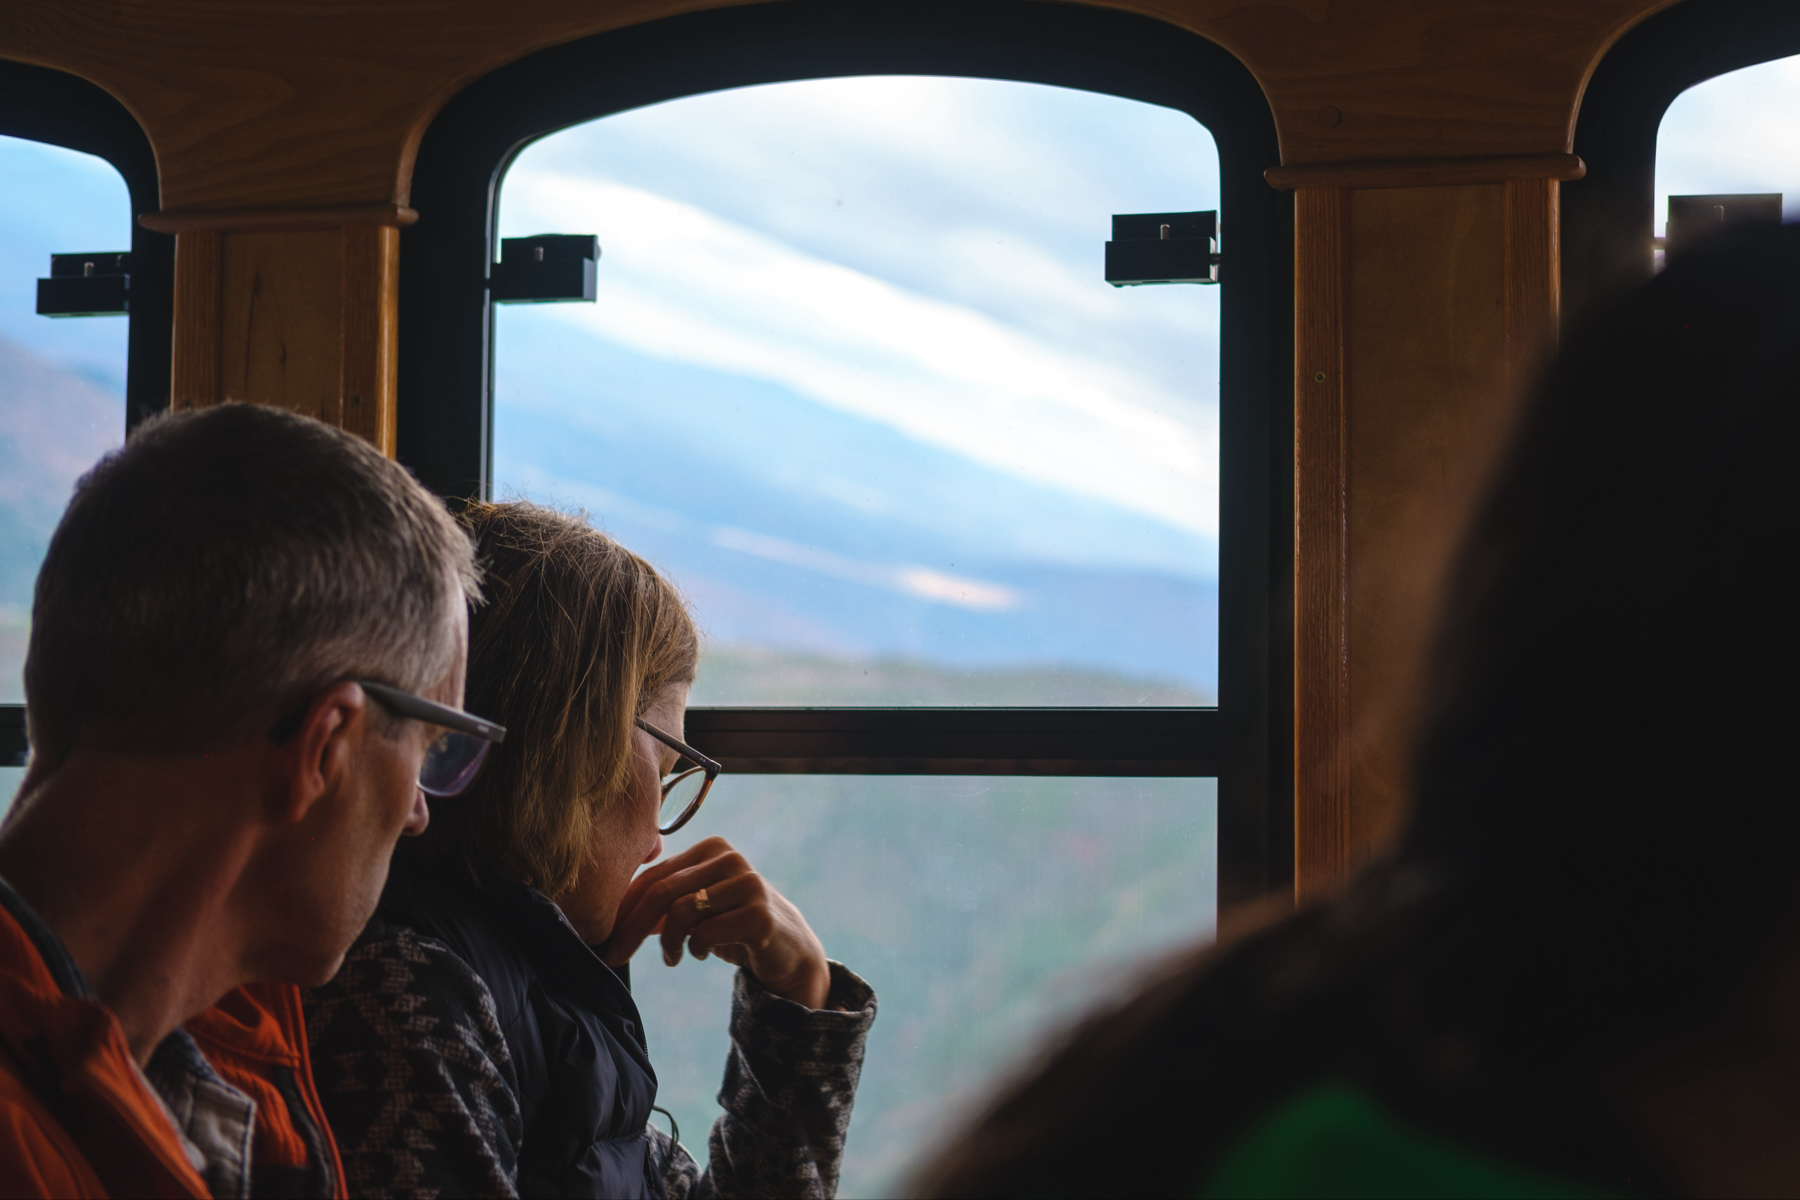 Two passengers looking out through the windows of a train at a scenic mountain landscape.